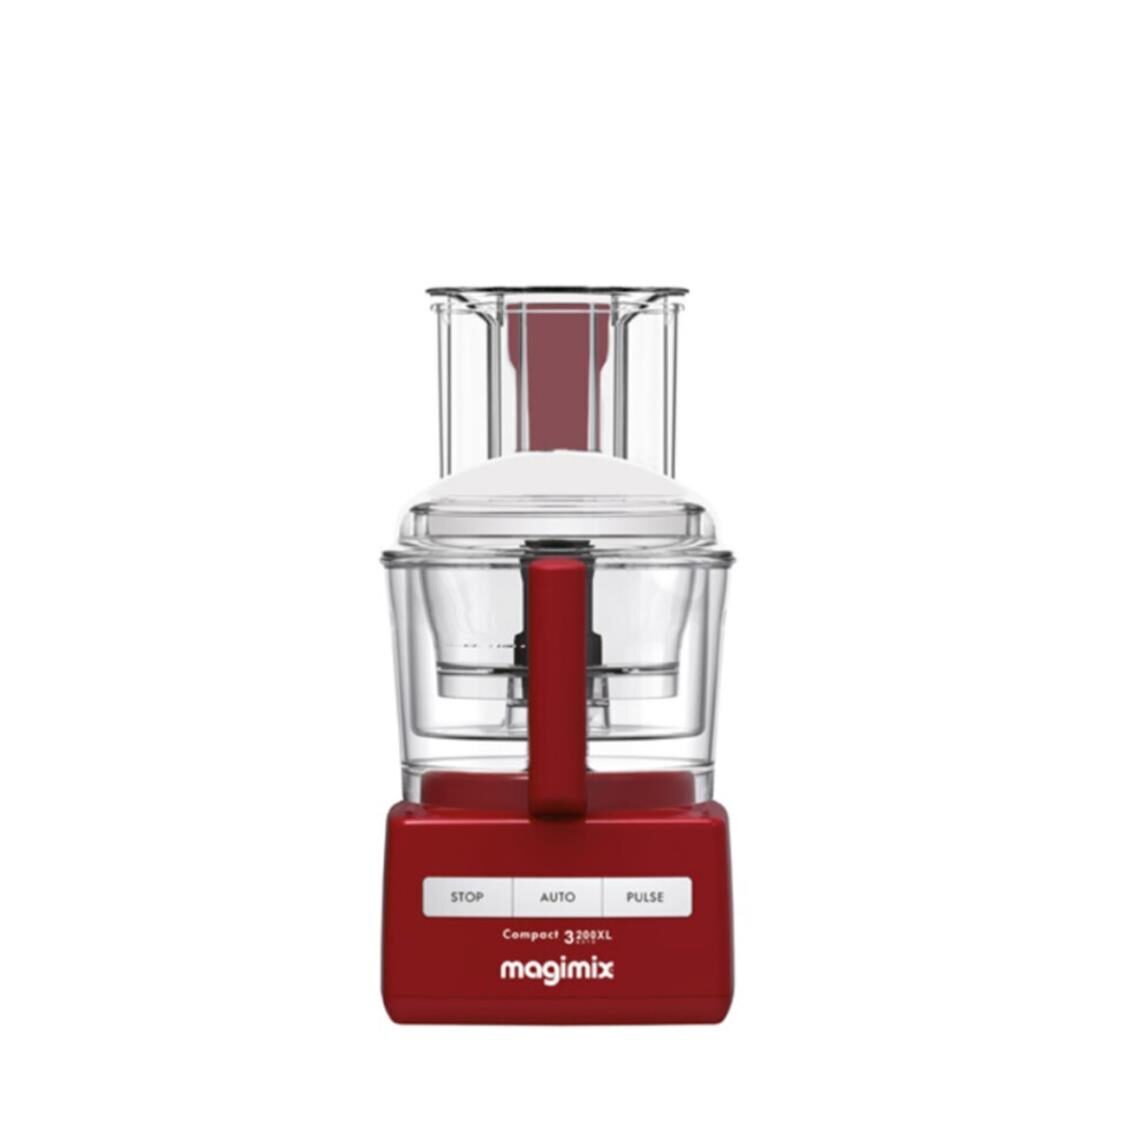 Magimix 3200XL Compact-ROUGE Multifunction Food Processor MGMX023229